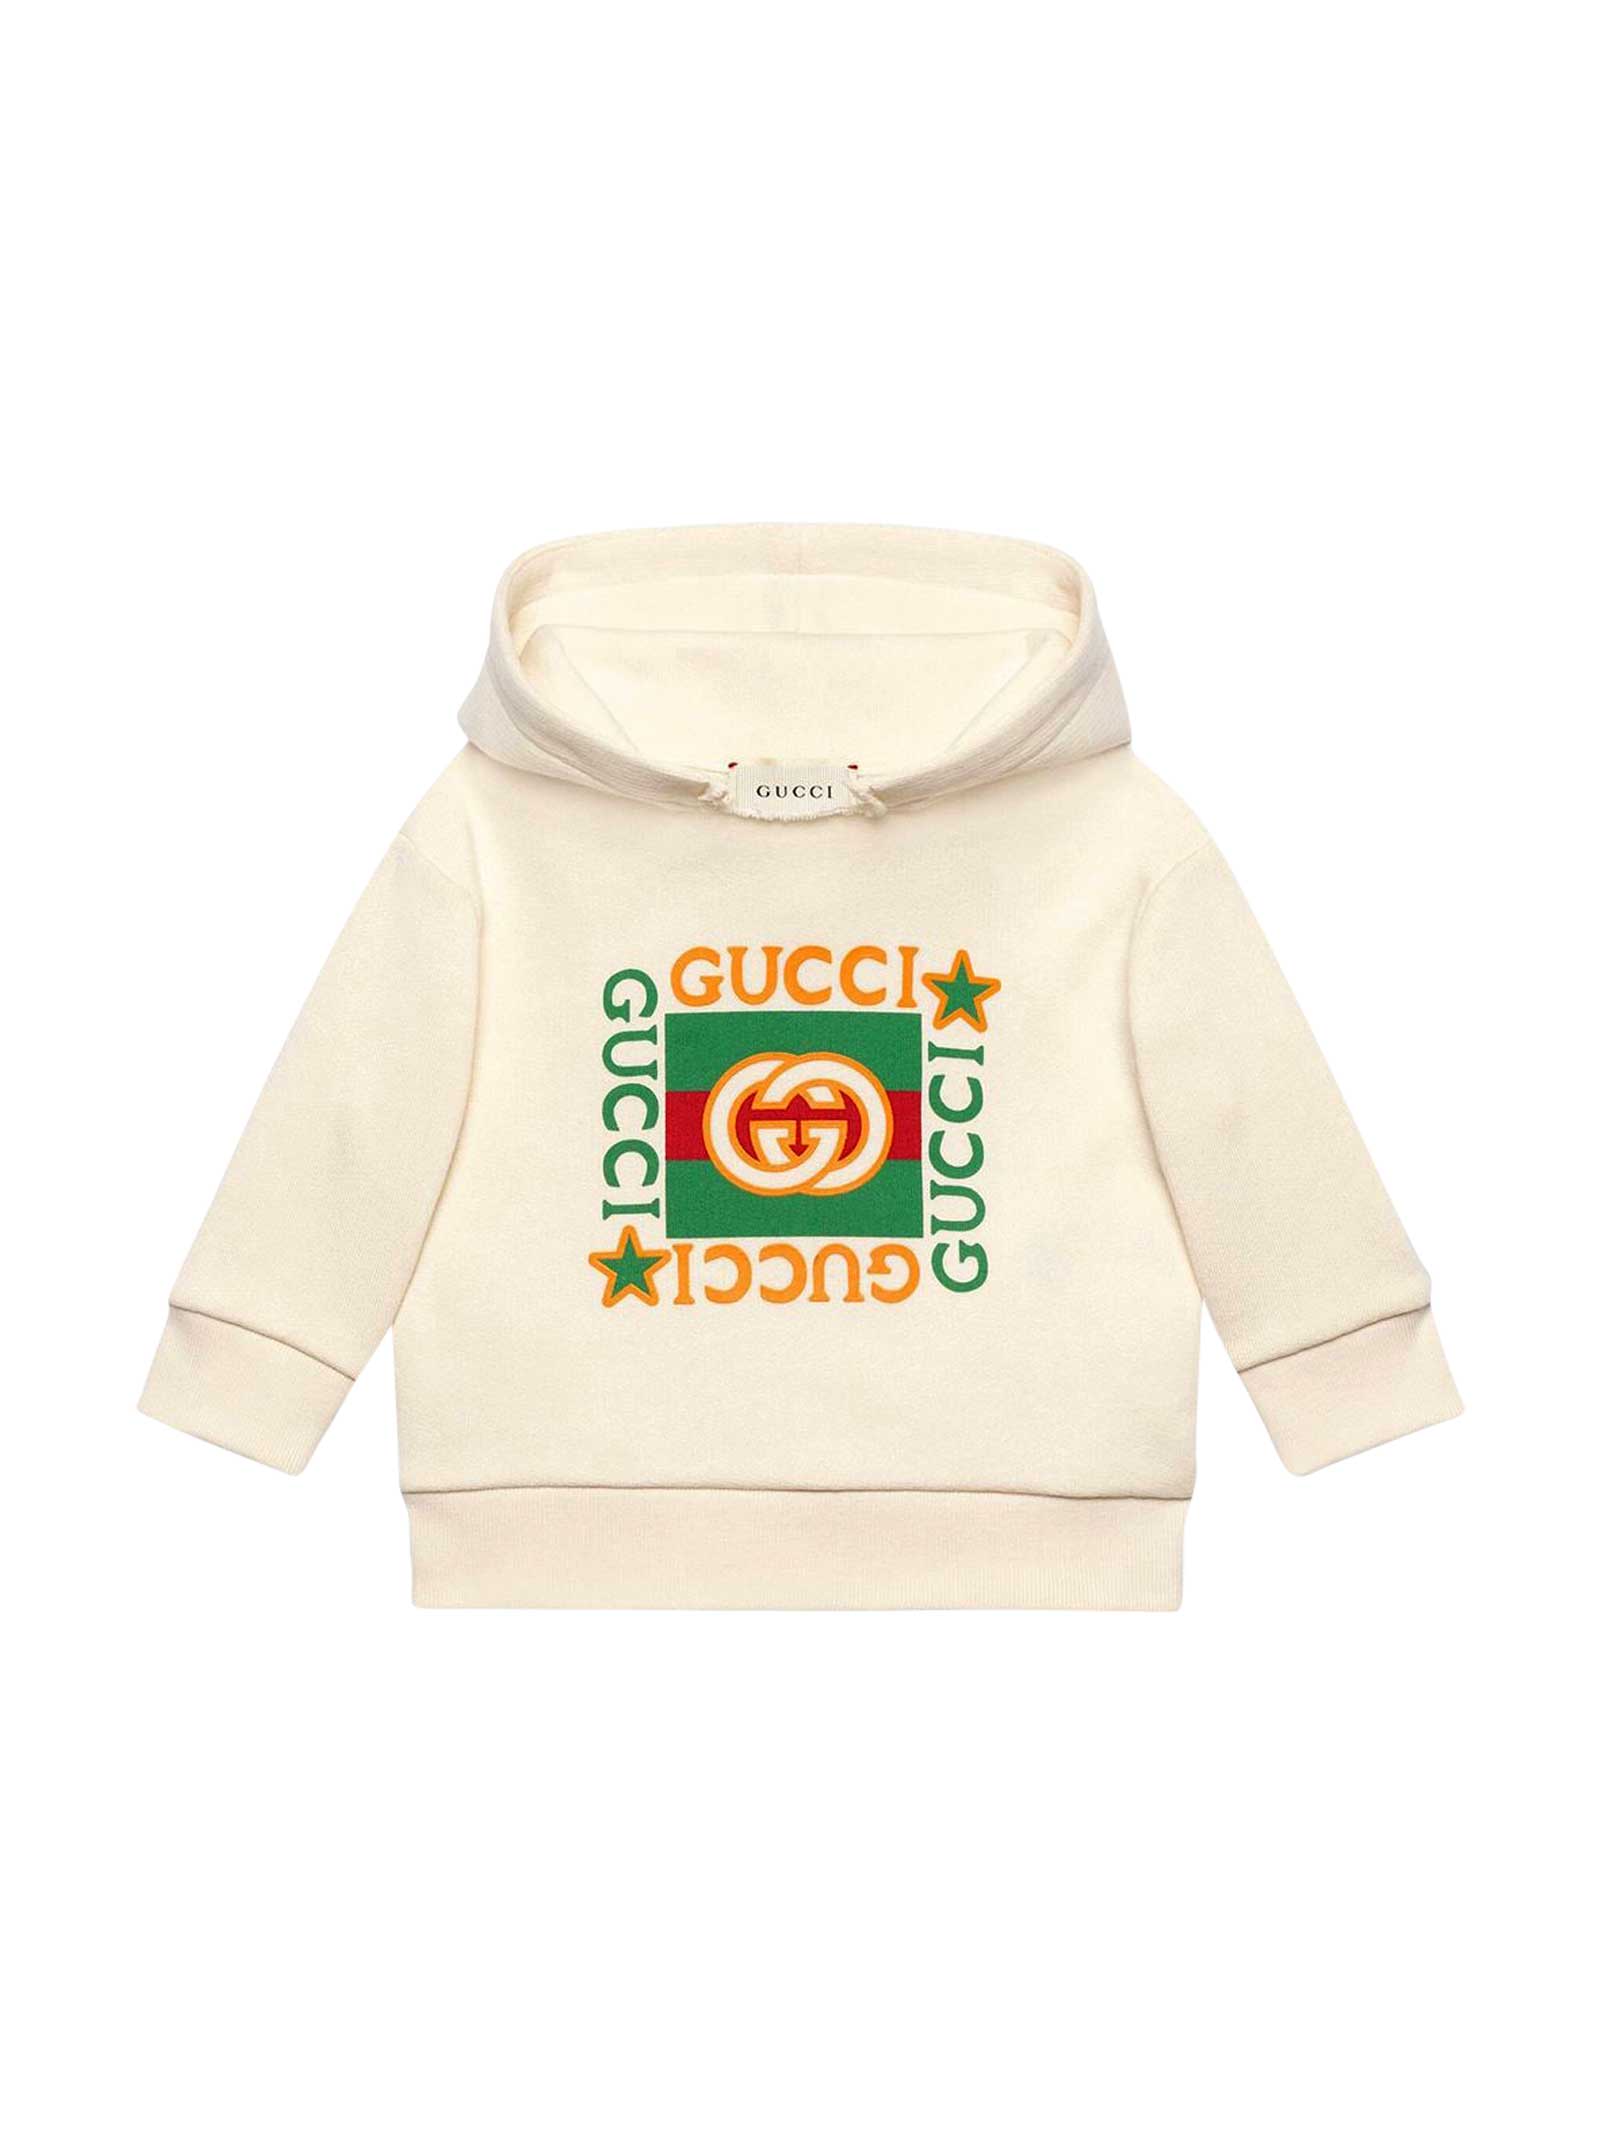 Gucci White Sweatshirt With Frontal Print